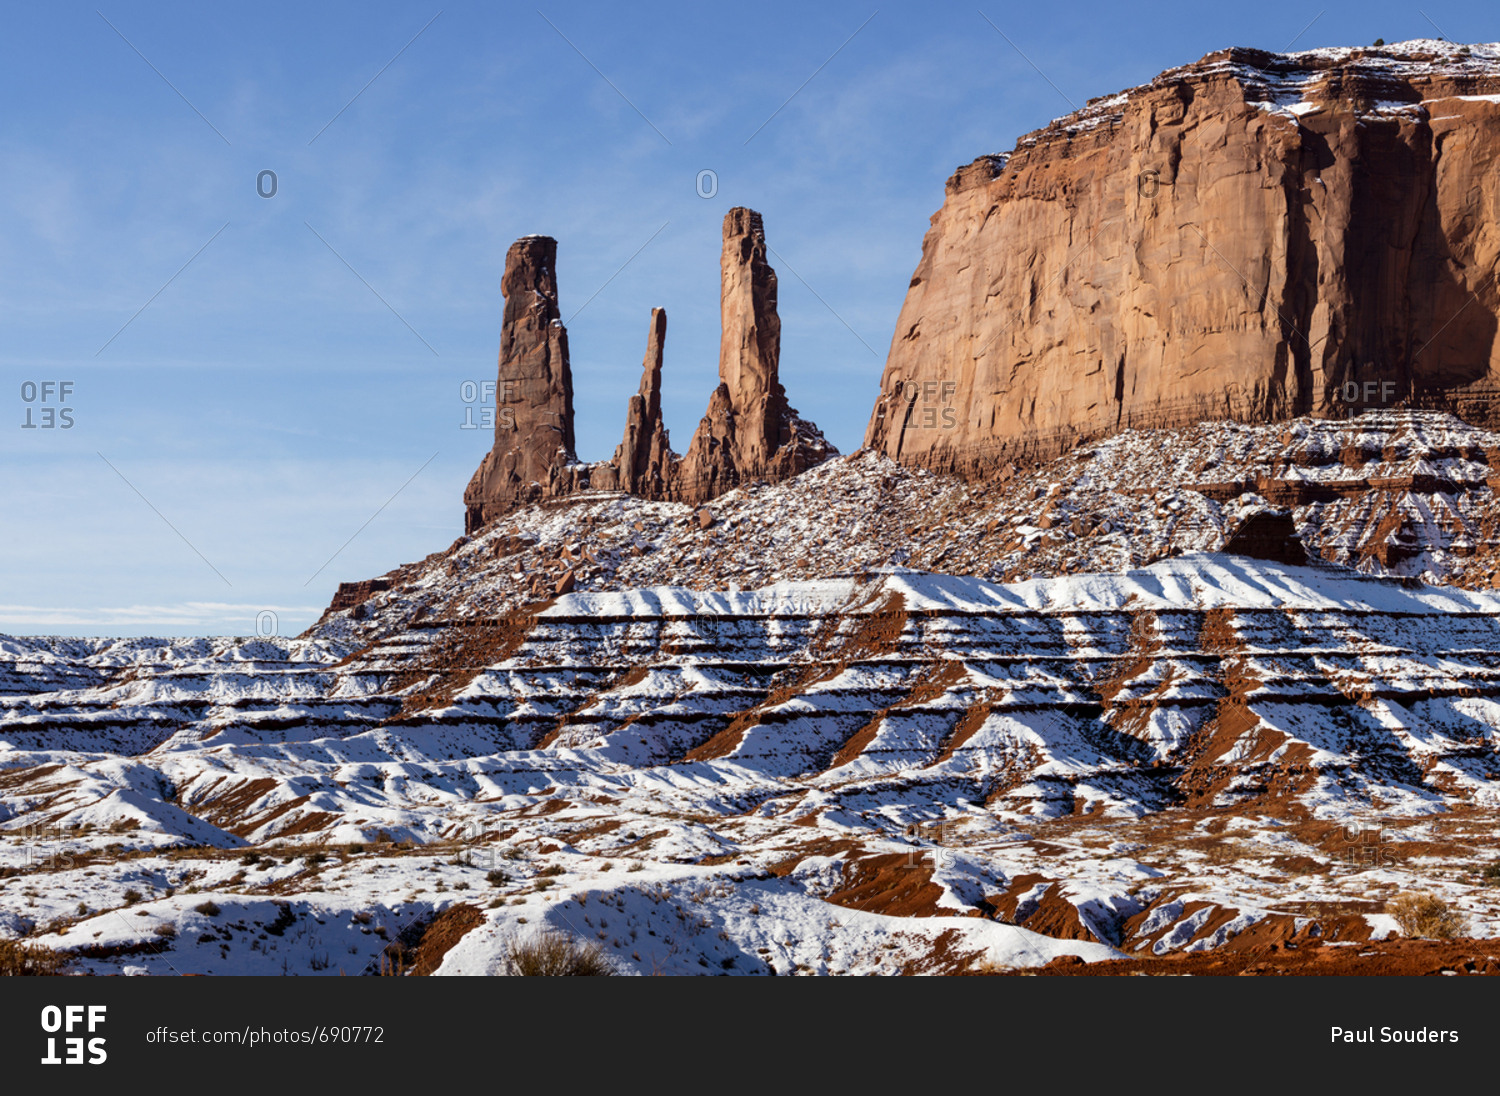 USA, Arizona, Monument Valley Navajo Tribal Park, High resolution panoramic view of snow-covered Monument Valley on winter morning